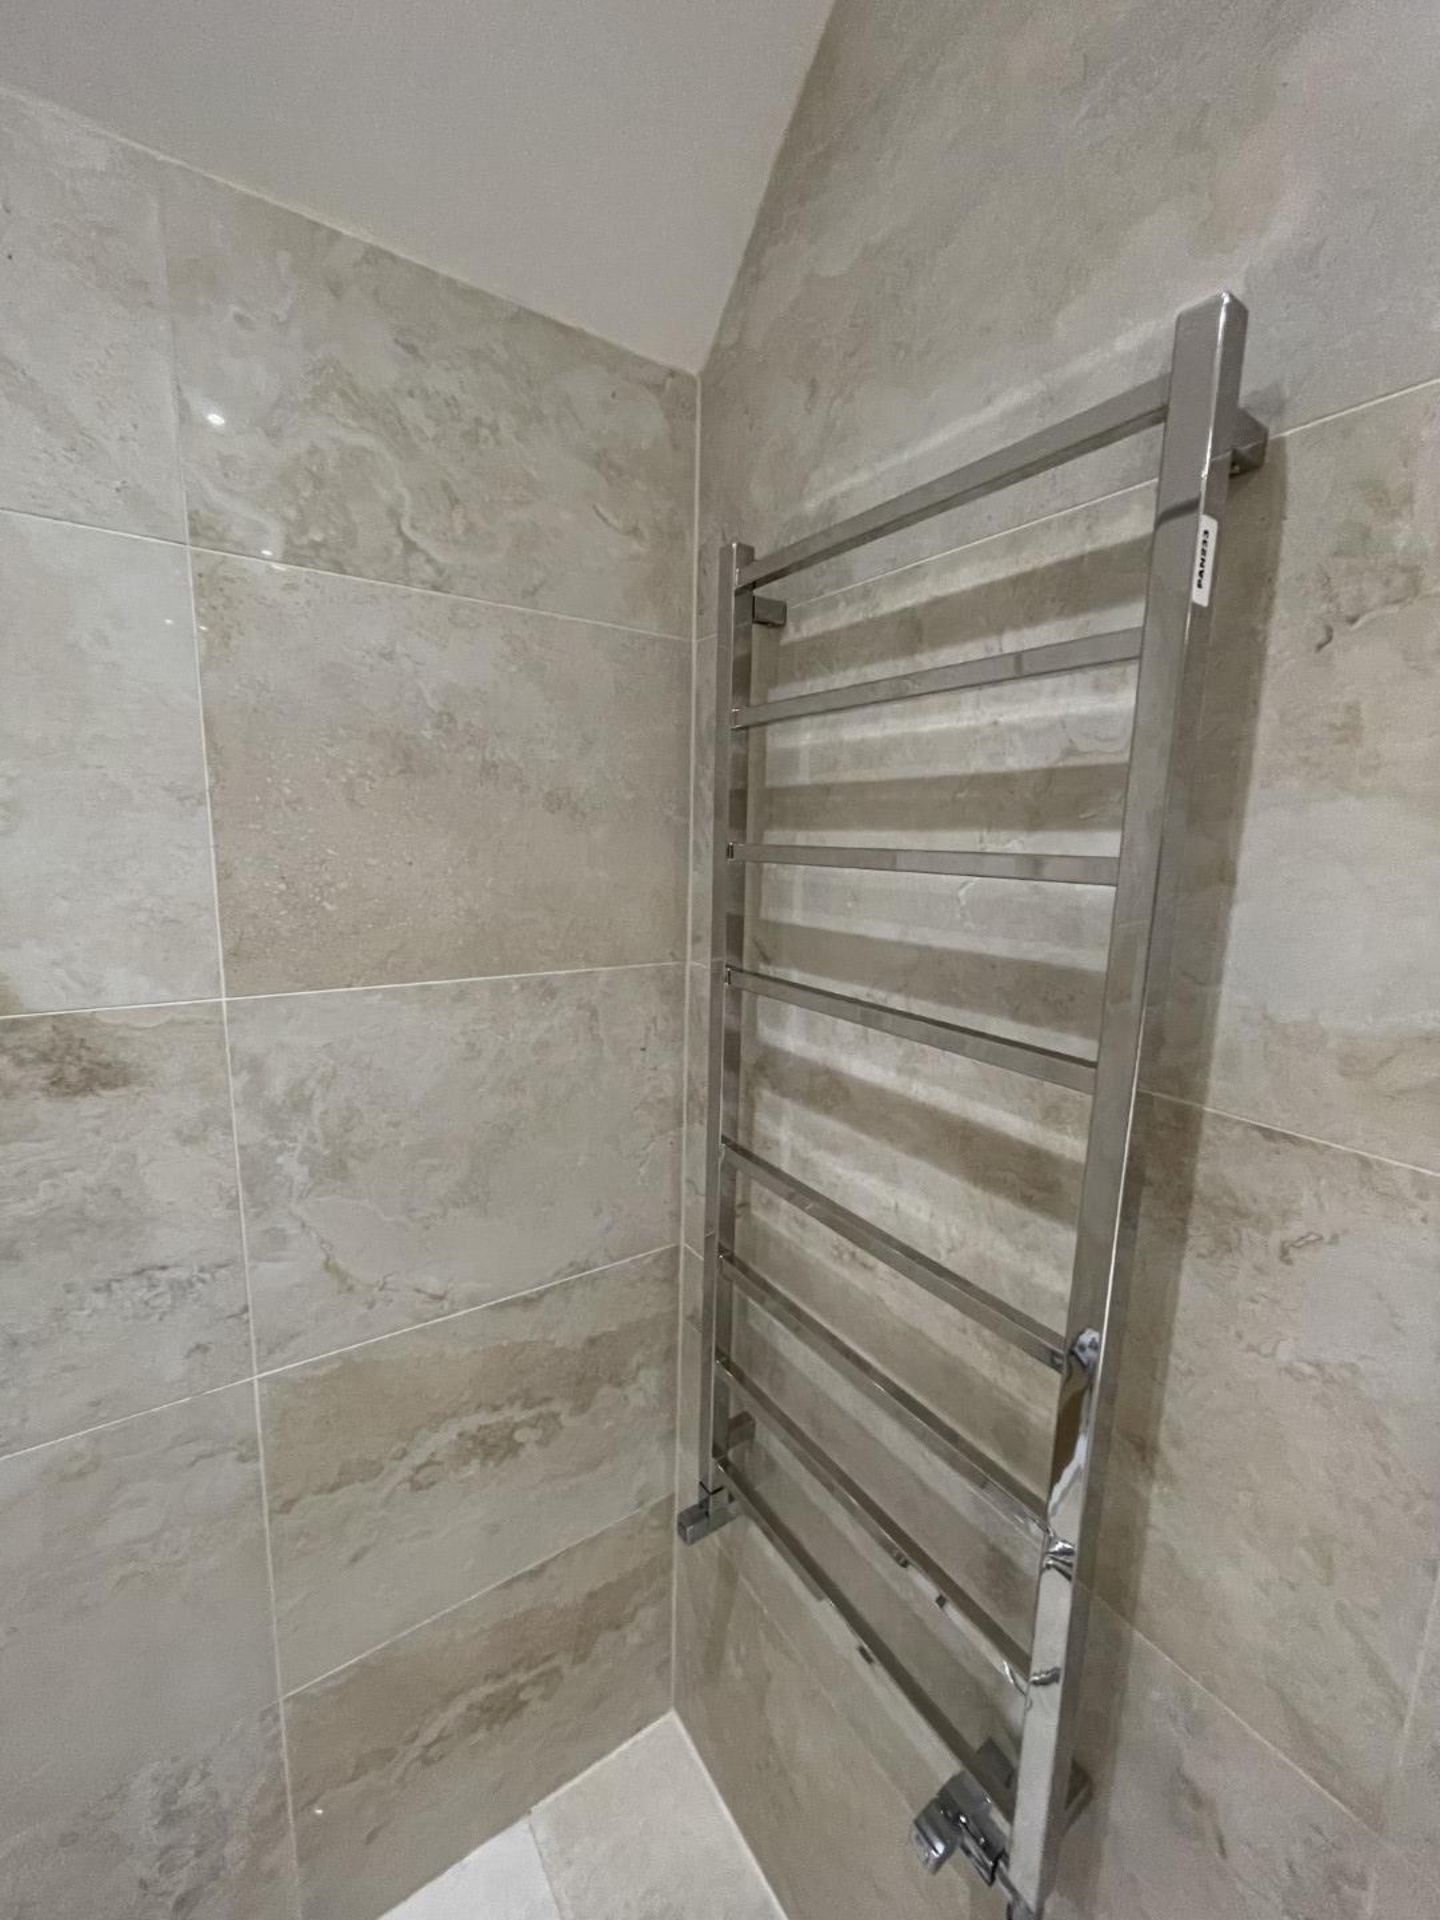 1 x Premium Towel Radiator in Chrome - Ref: PAN233 - CL896 - NO VAT ON THE HAMMER - Location: - Image 9 of 10